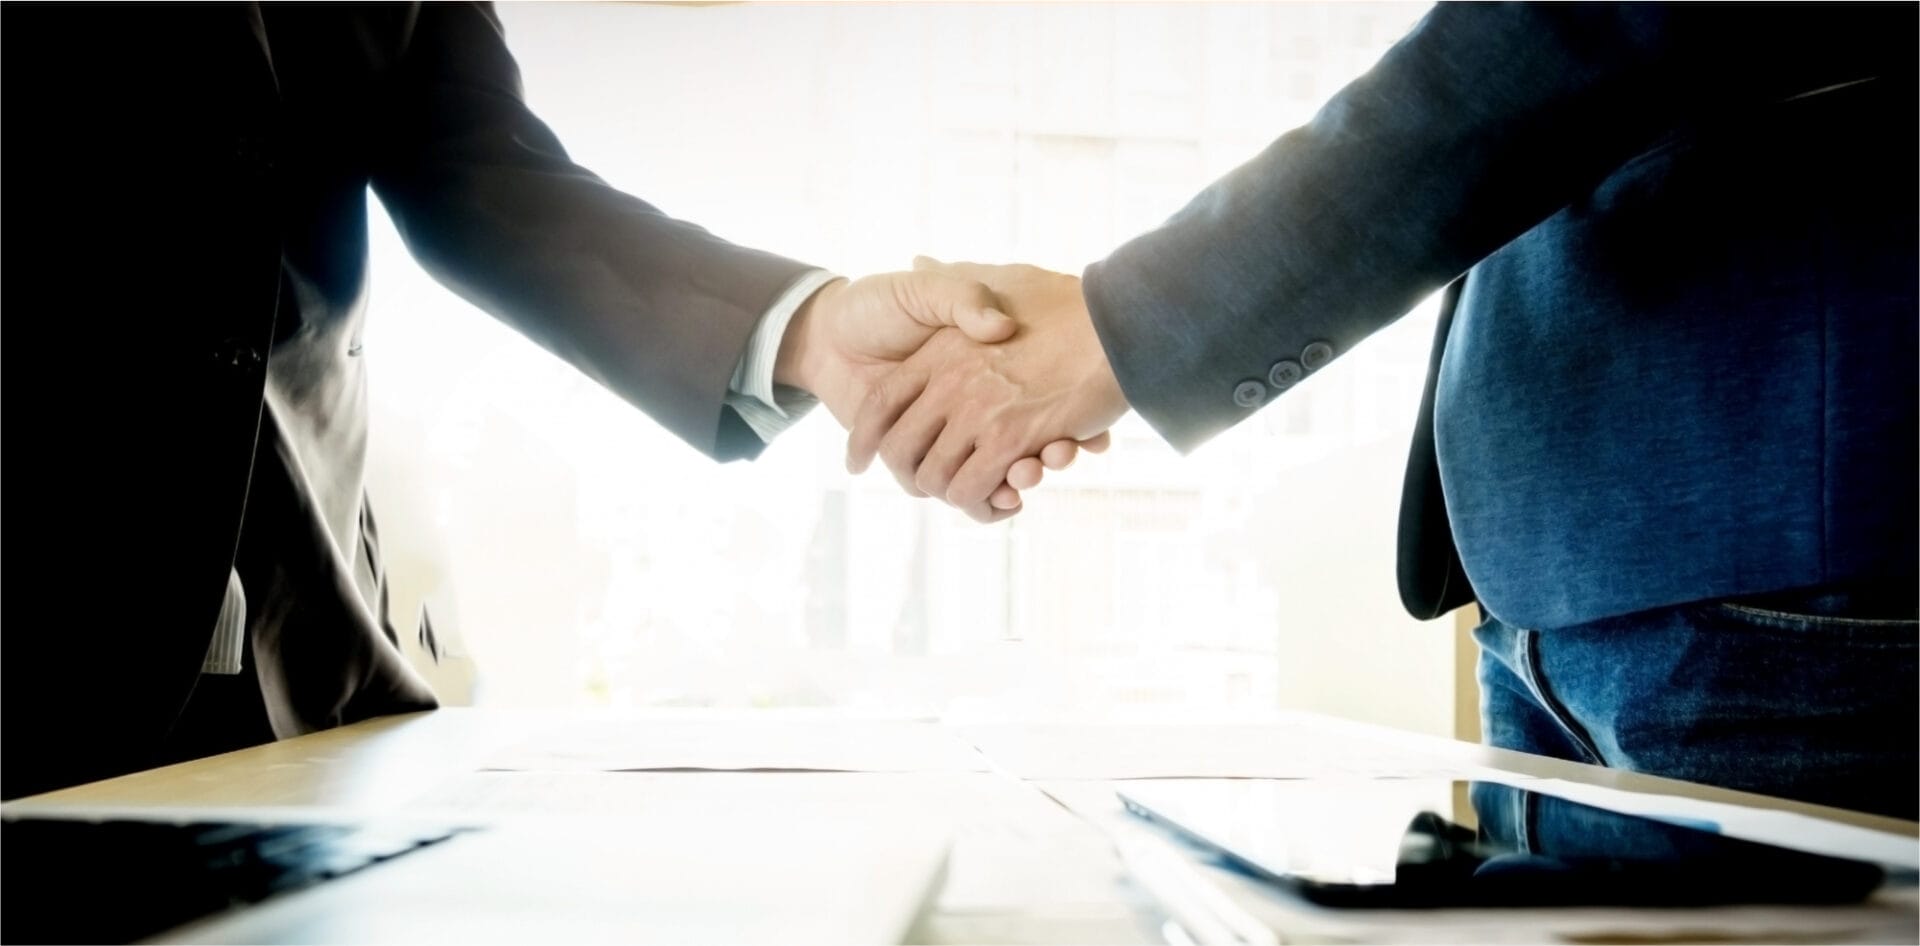 The image features two business professionals shaking hands across a table, symbolizing a successful agreement or partnership. This kind of imagery is commonly used to represent business deals, collaborations, or the closure of negotiations. The backlighting and focus on the handshake emphasize the positive outcome and mutual agreement in a professional setting.